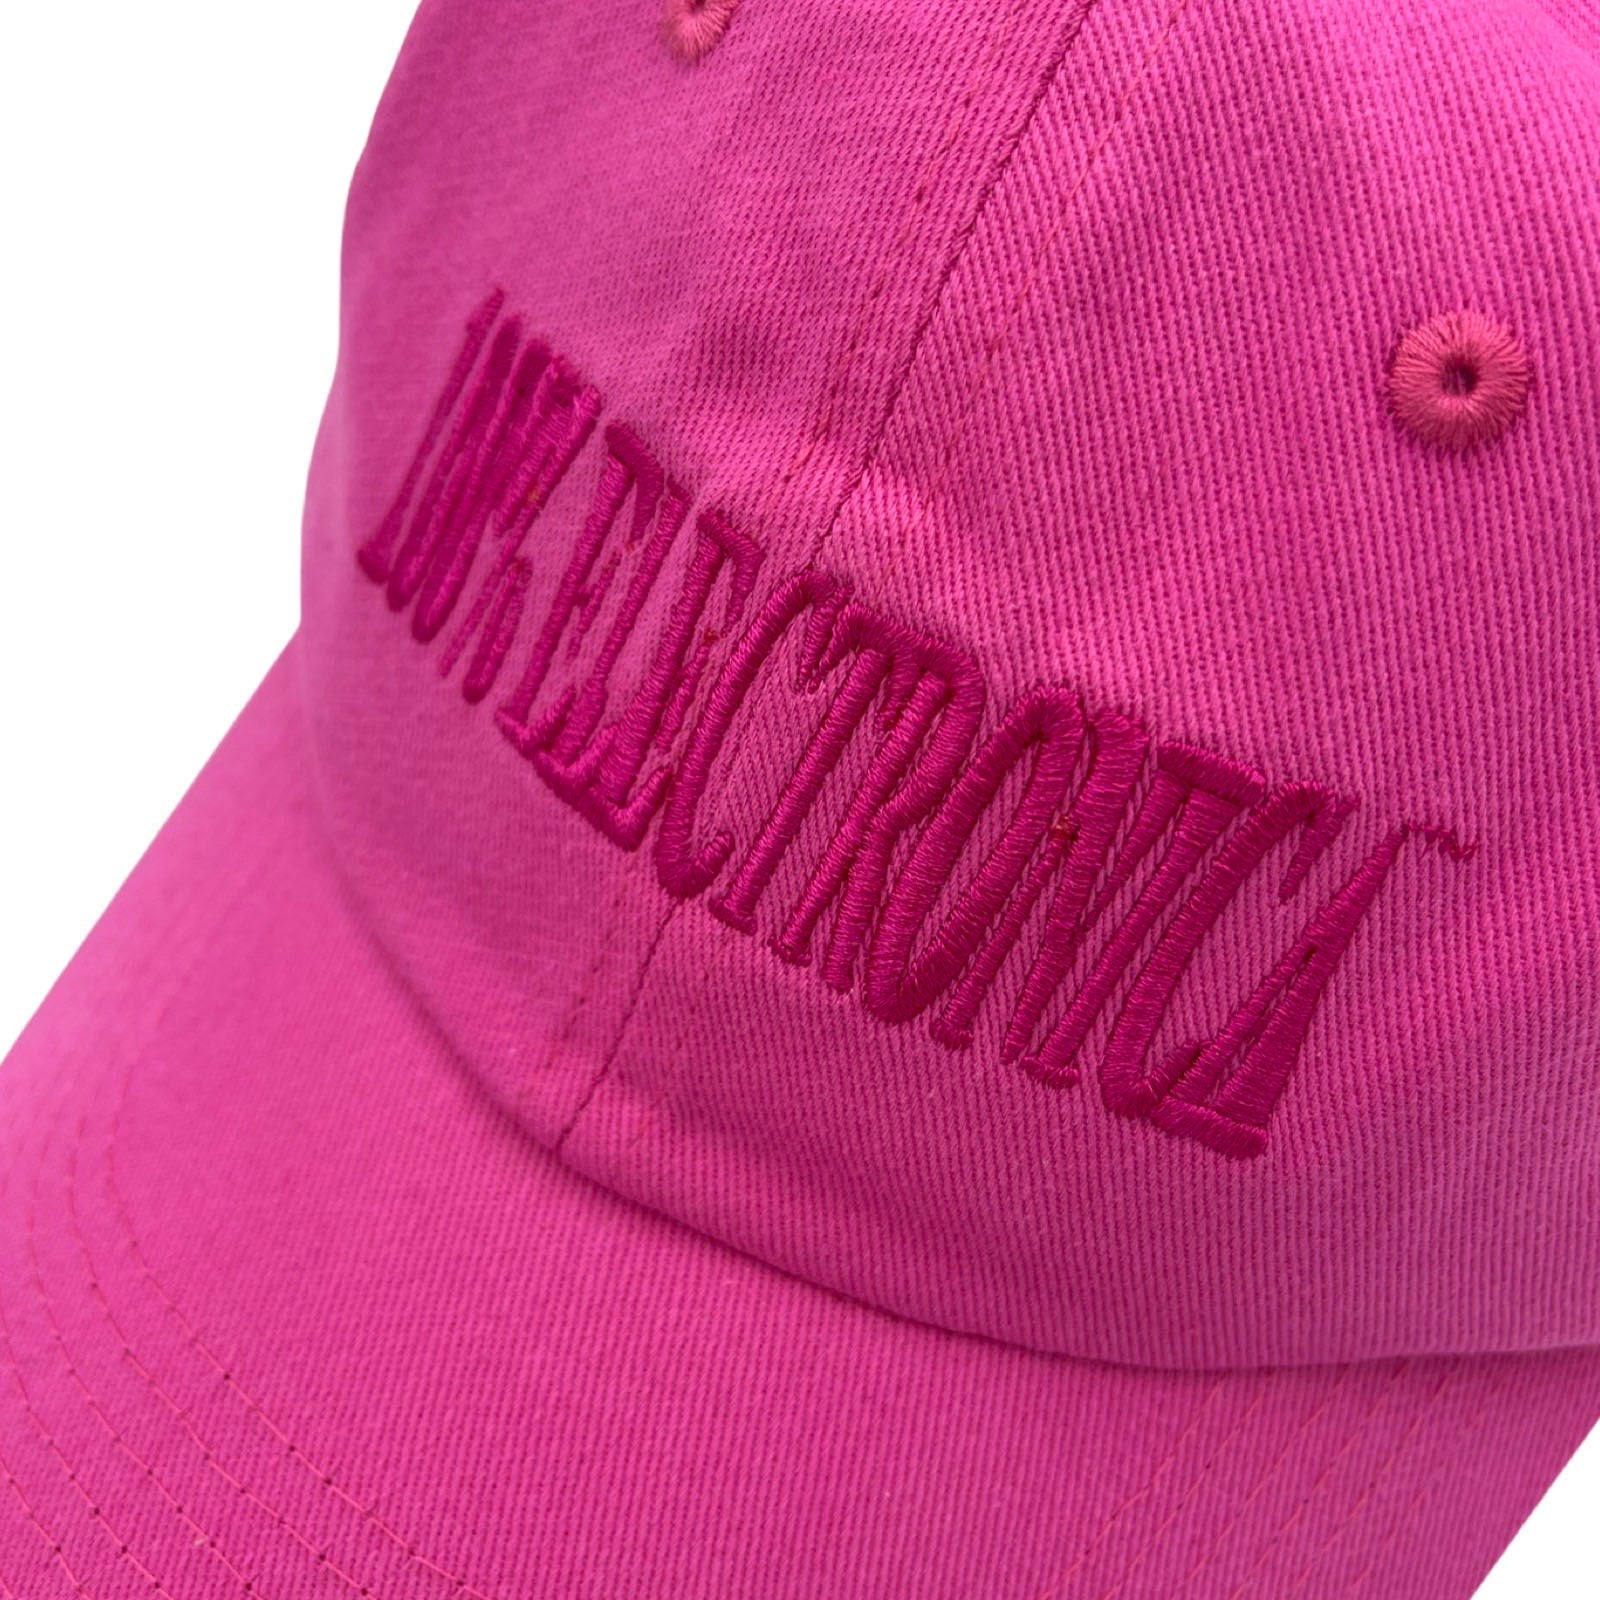 100% Electronica - Melt Logo Cap (Pink) - 100% Electronica Official Store (Photo 5)